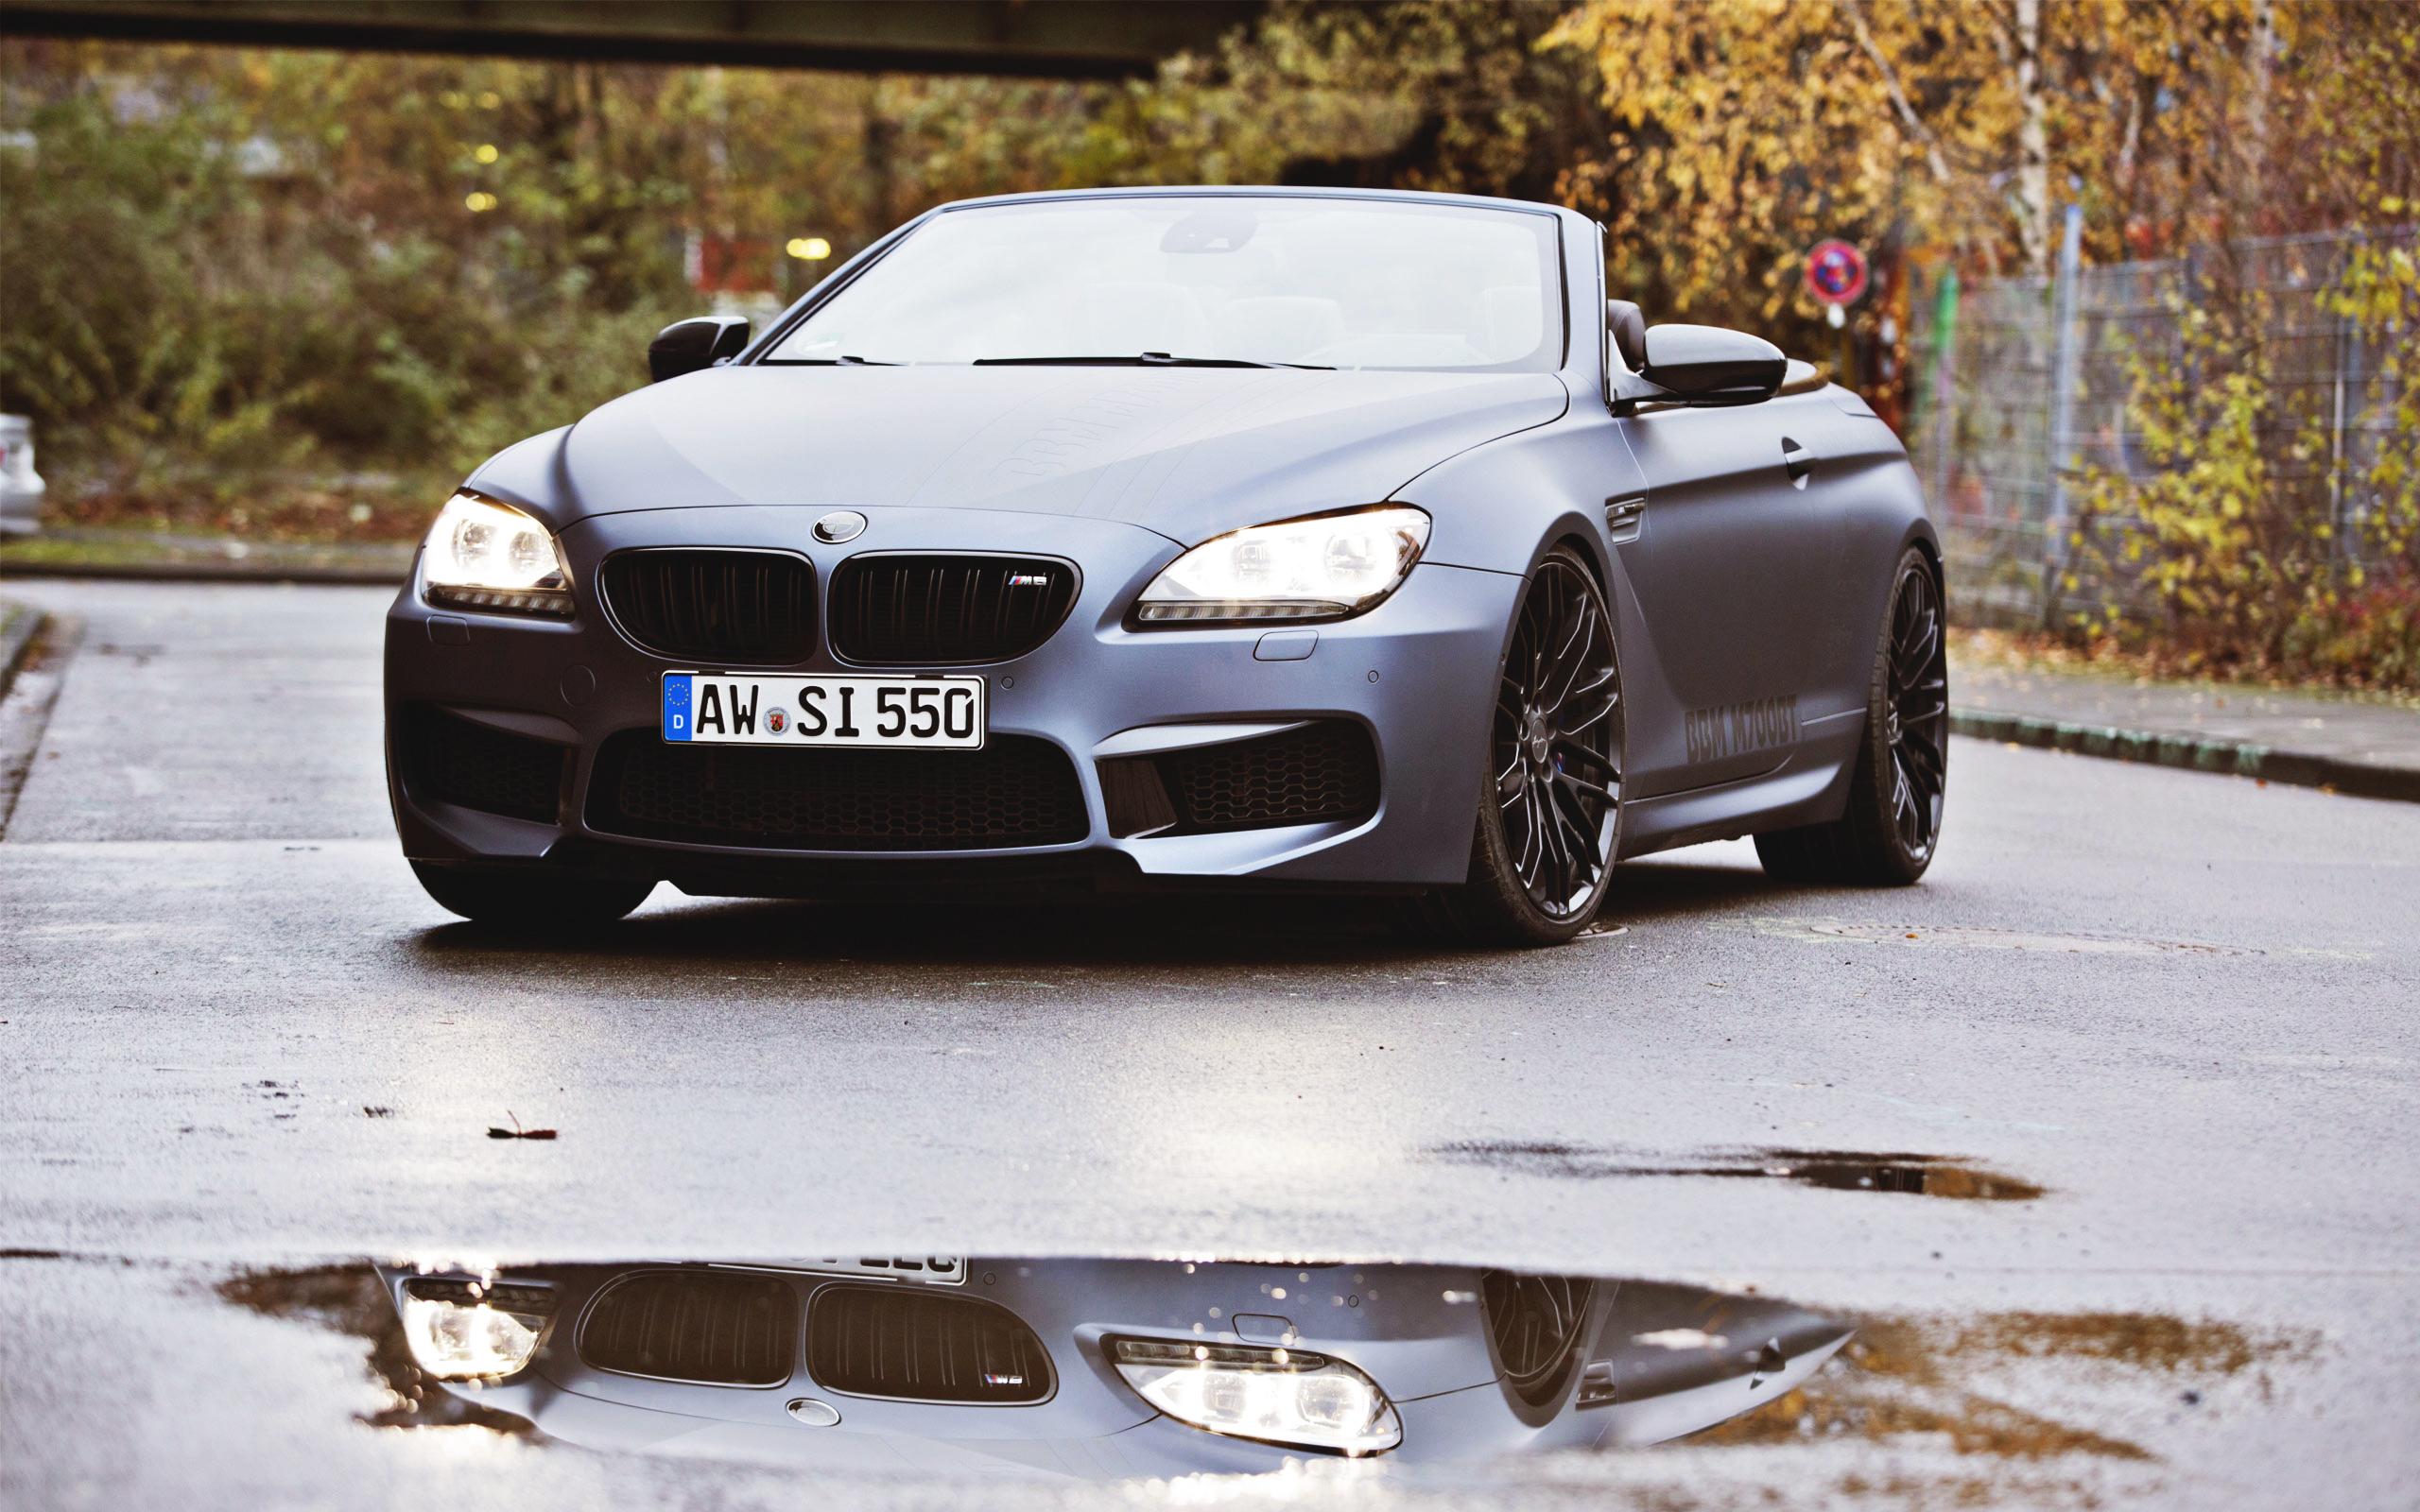 2560 x 1600 · jpeg - BMW M6 Wallpapers, Pictures, Images